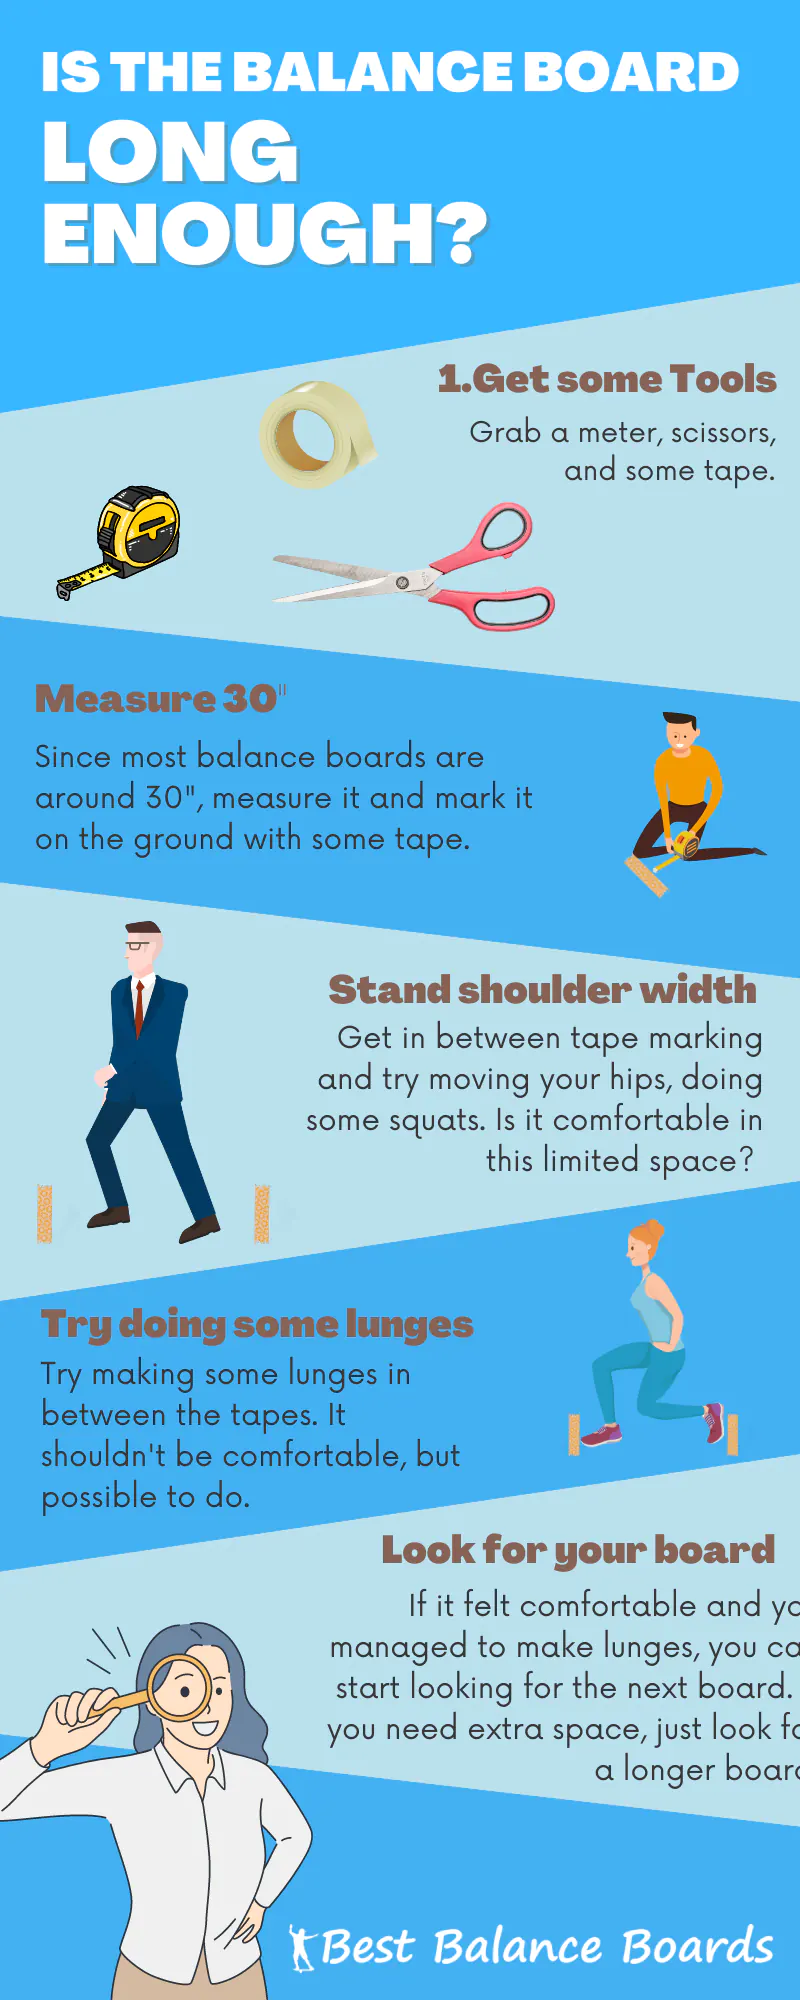 Infographic depicting step by step guide to easily check board length suitability